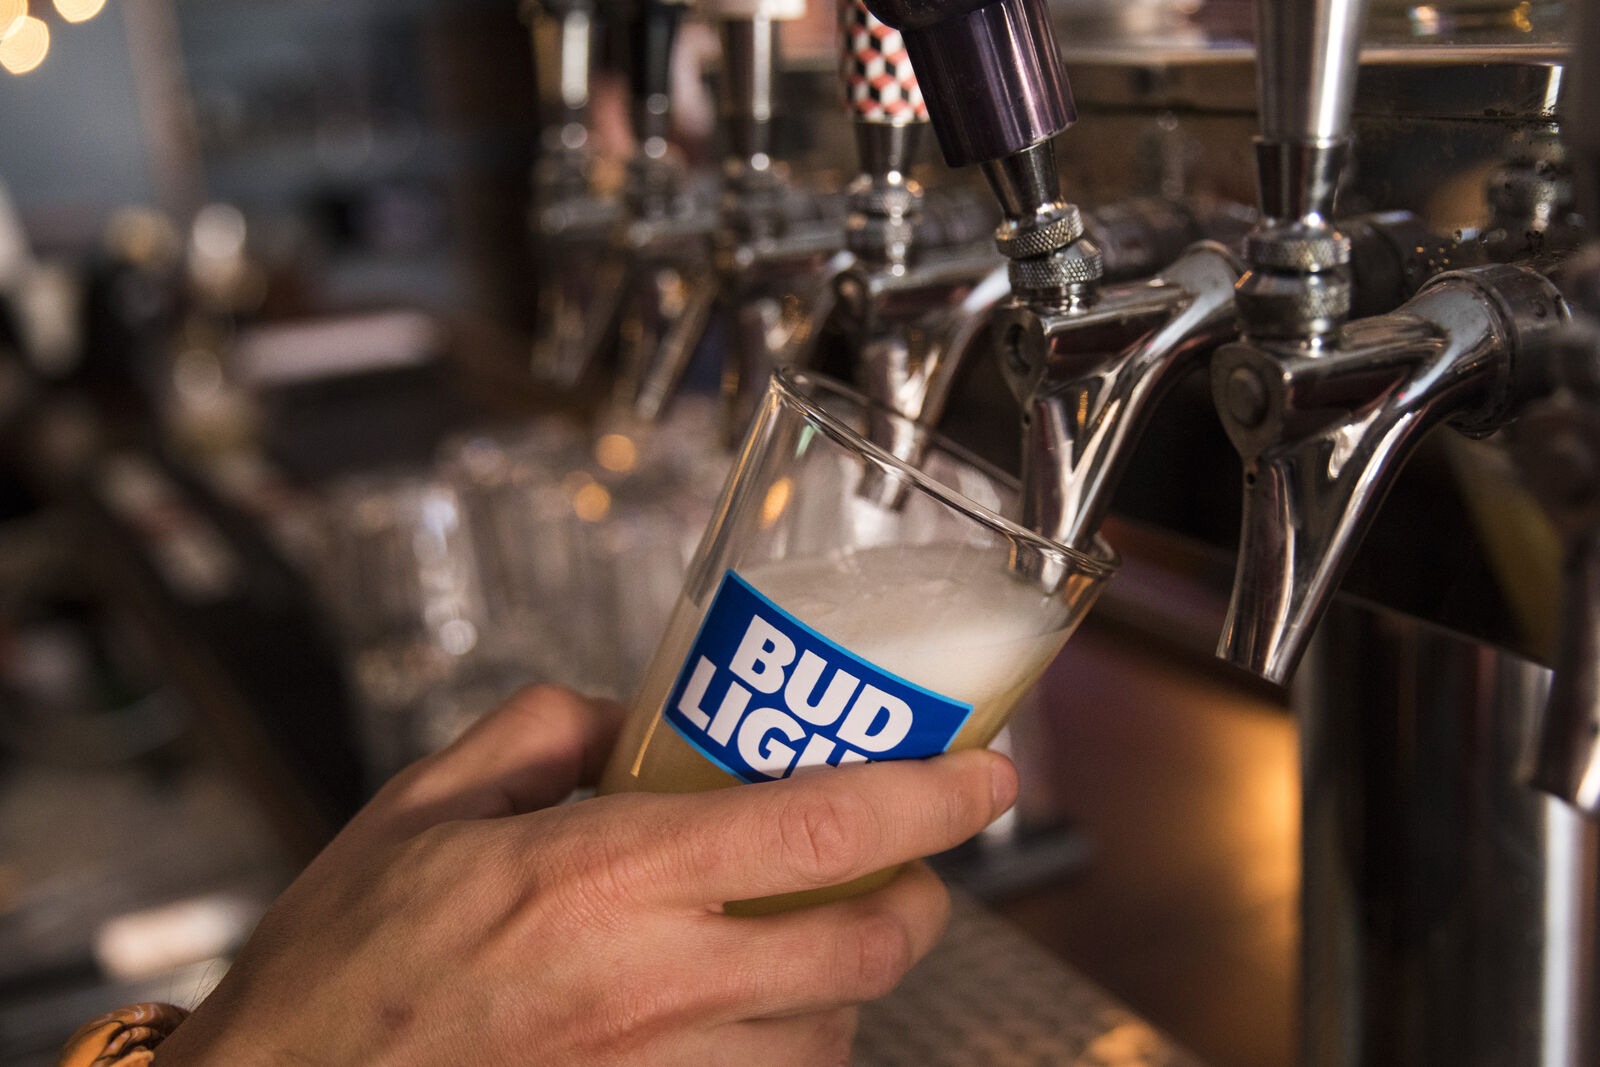 Bud Light VP Claimed Brand Was ‘Out of Touch,’ Needed ‘Inclusivity’ to Attract Young People